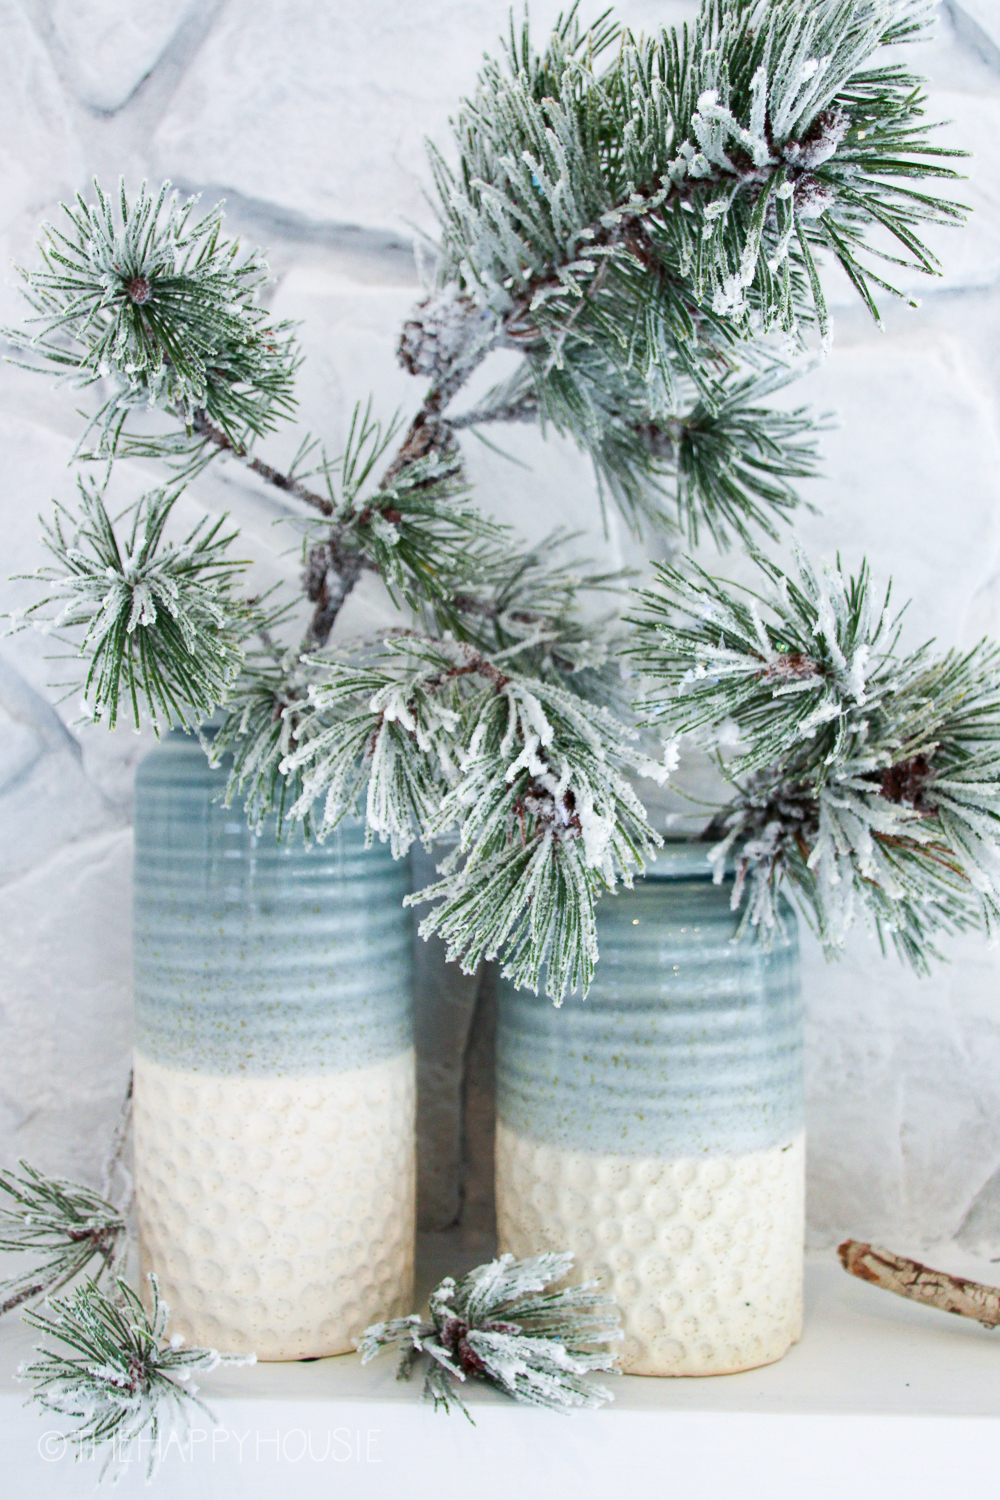 Two pottery vases with gradients of off white and green and blue with a flocked evergreen branch inside.